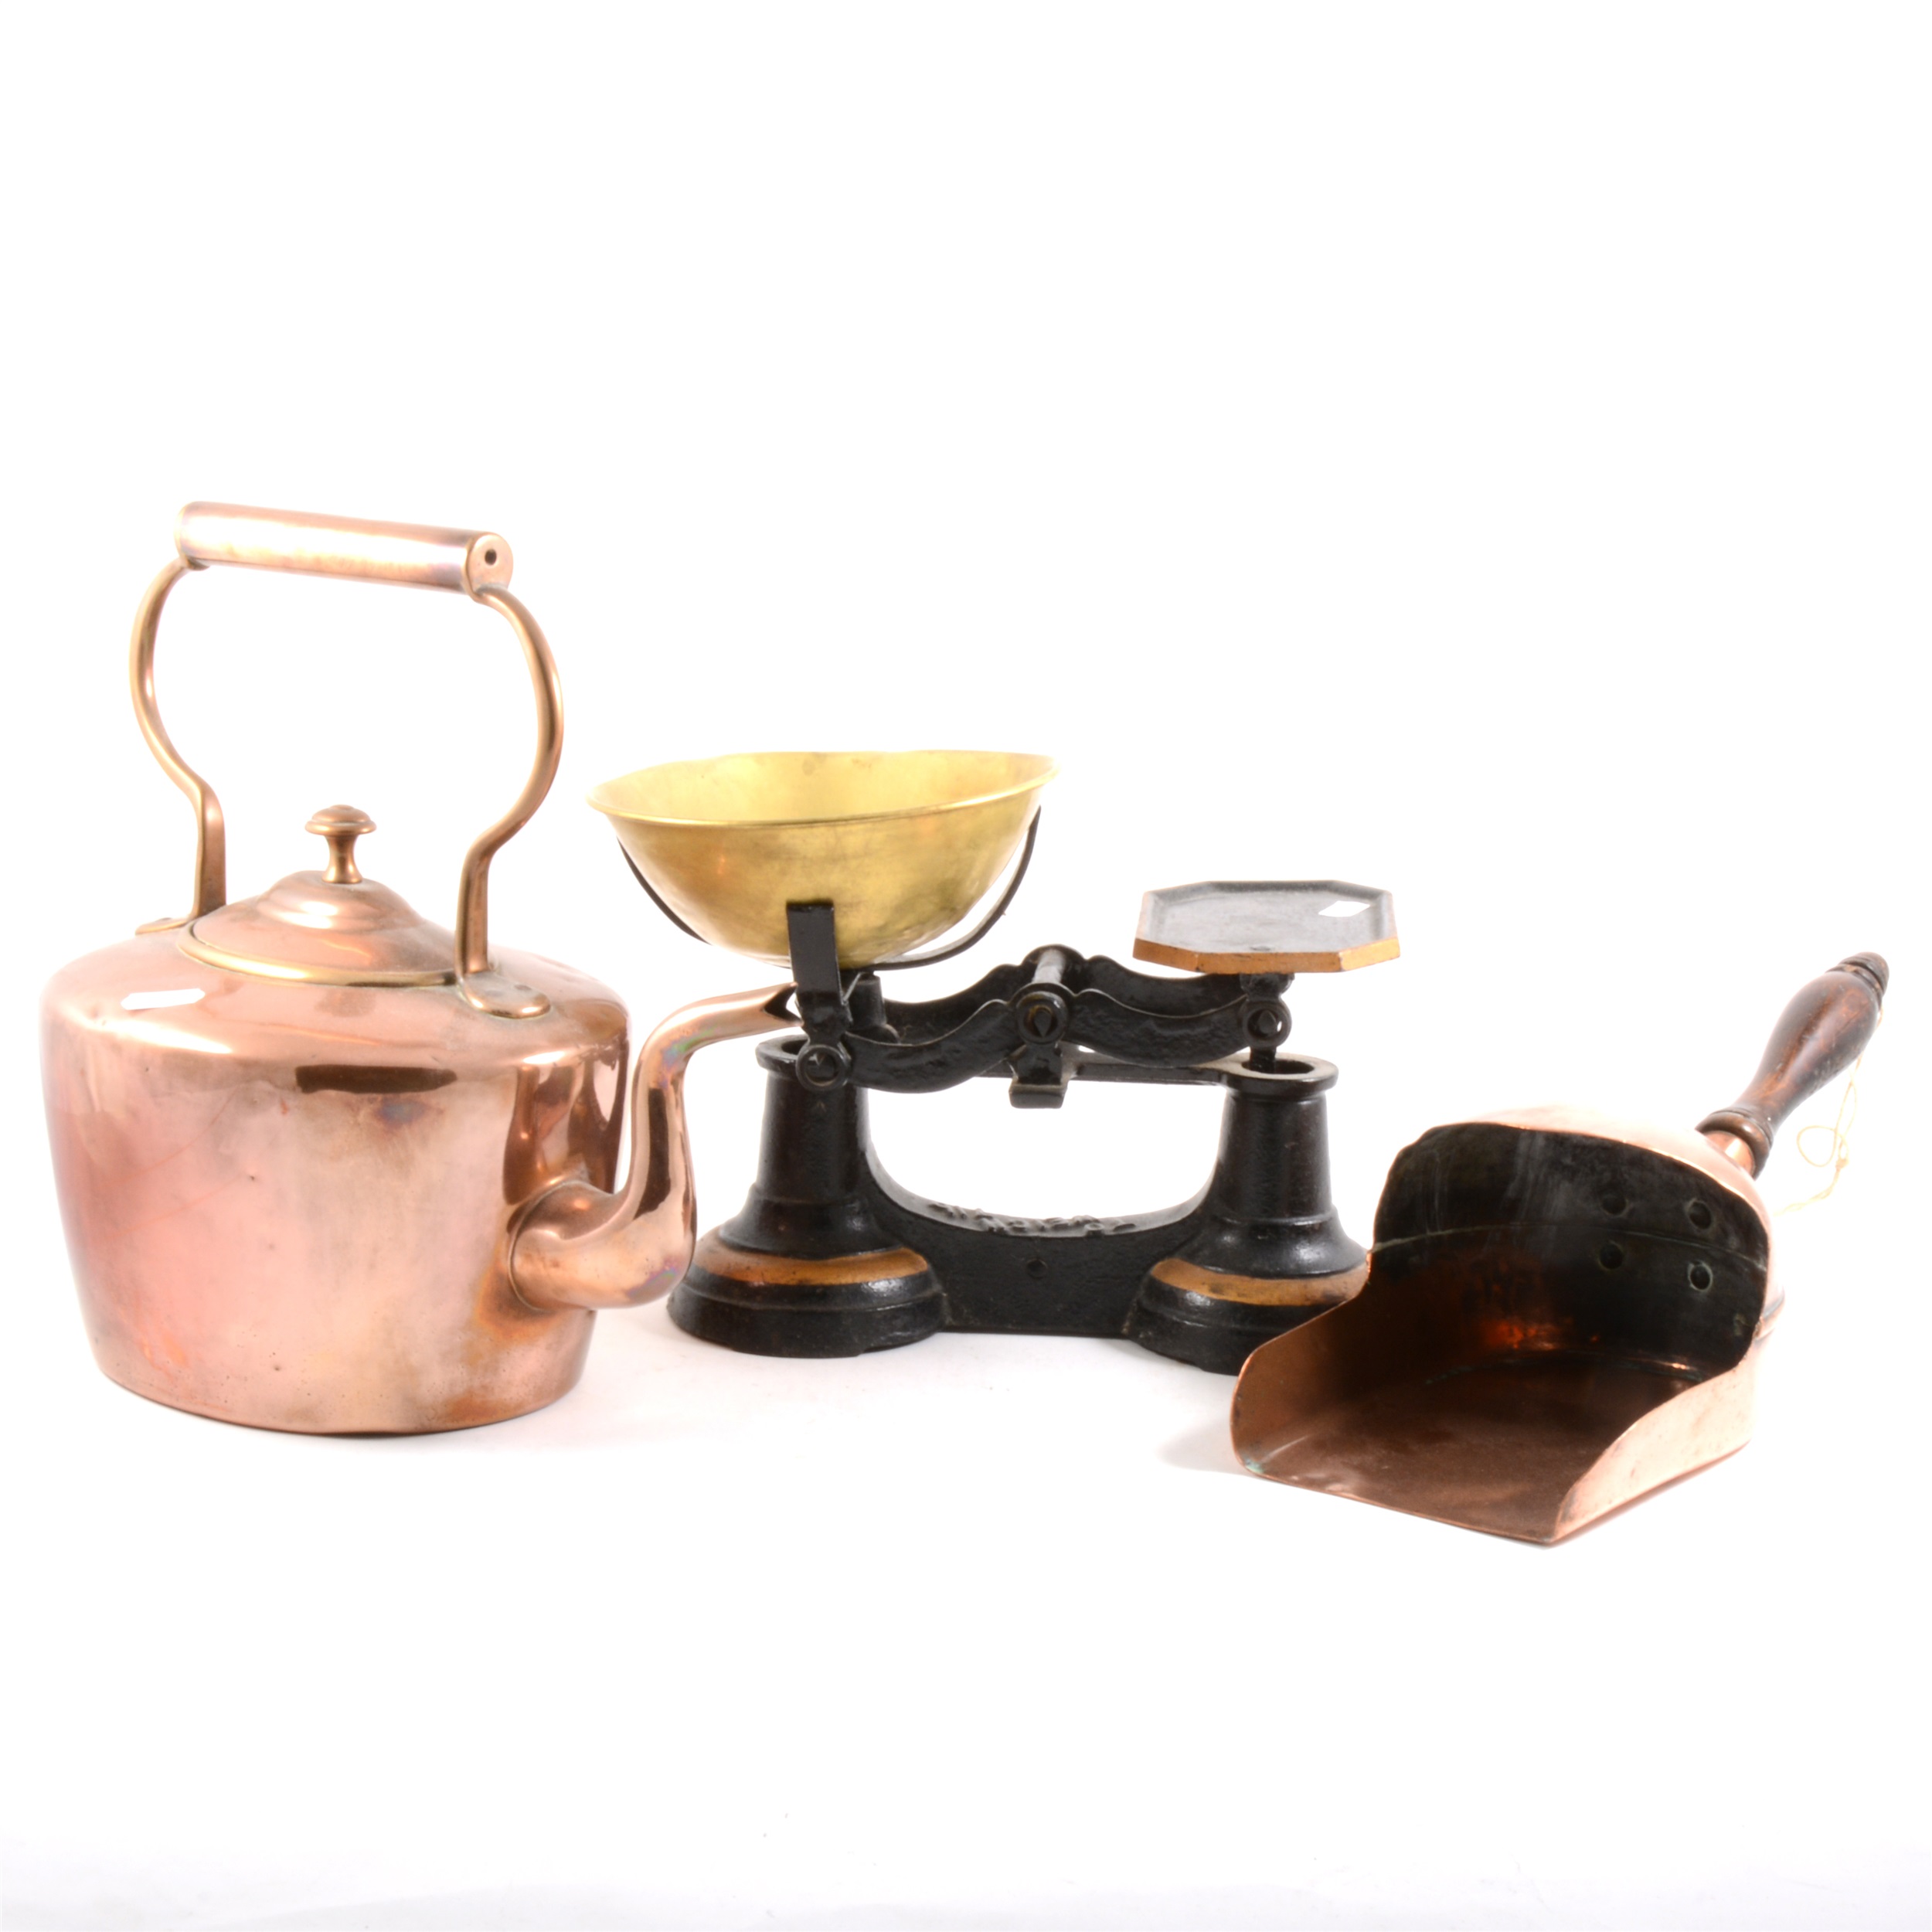 A Victorian copper kettle, bras weights, and metalwares